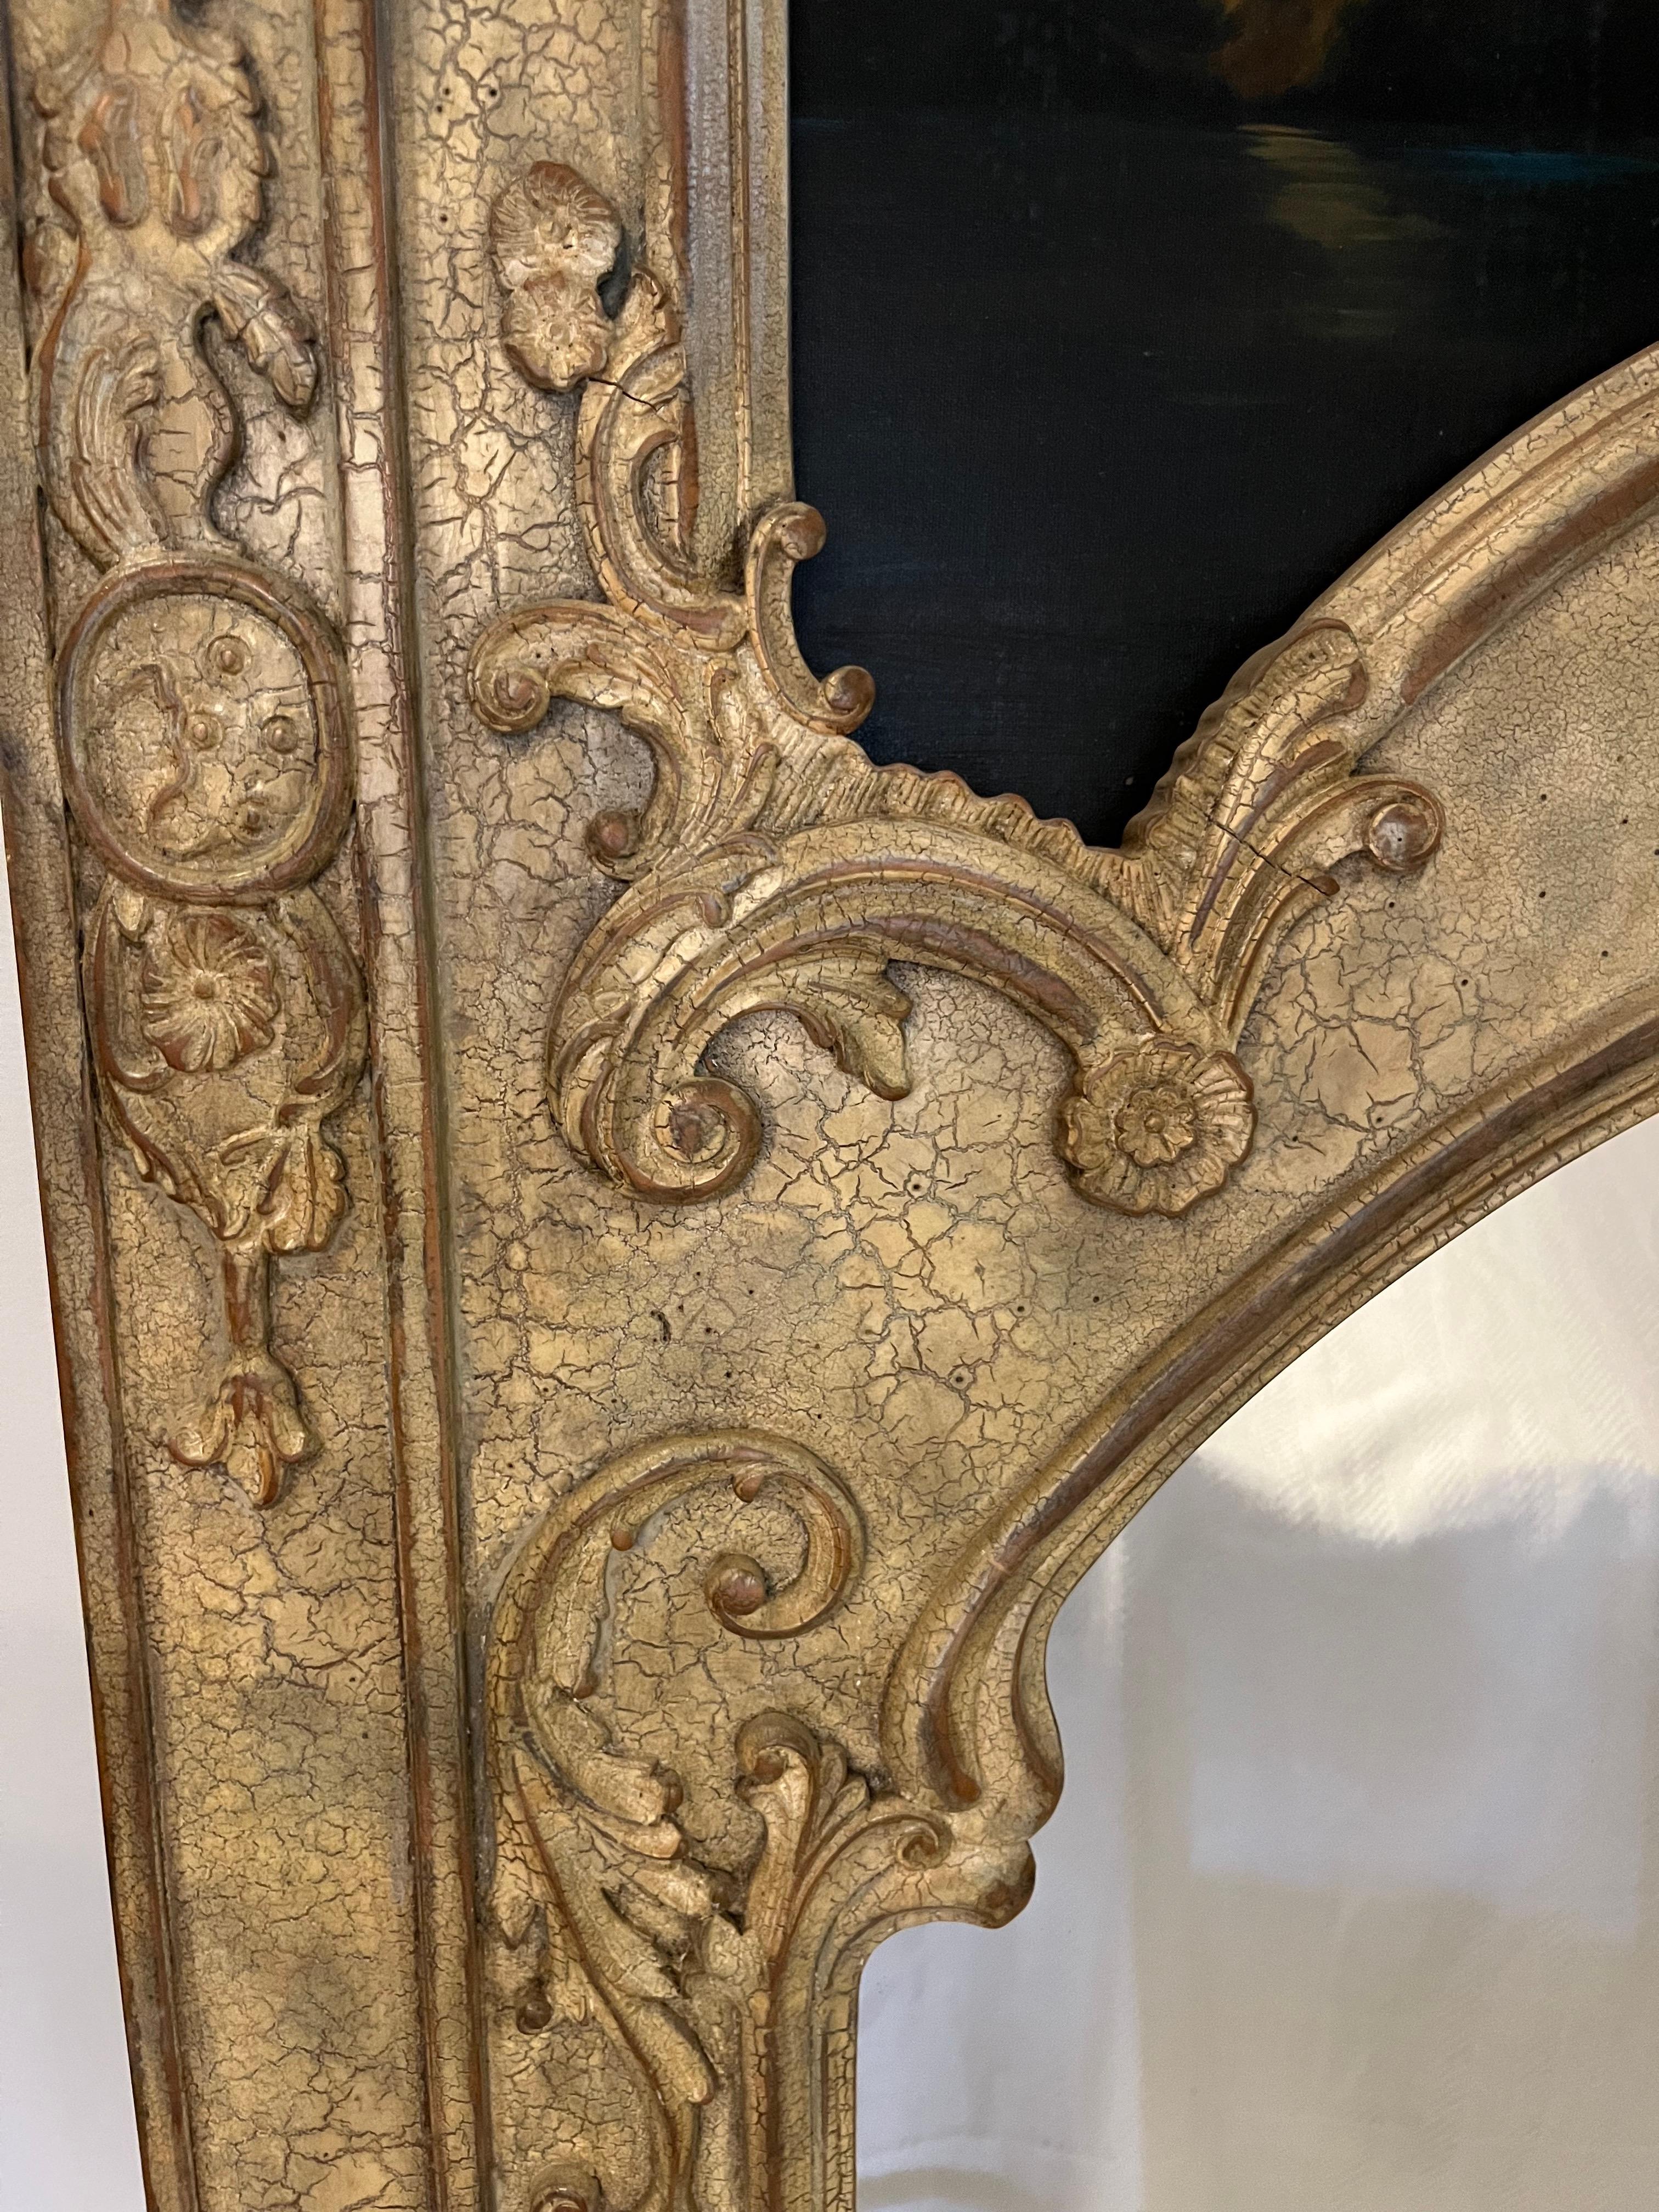 Louis XIV Style Trumeau Mirror with detailed carving, hand painted mural, and framed mirror. The arc at the top of the mirror is accented with shell and foliate details, and sits underneath a desert oasis landscape. The rich painting is enhanced by